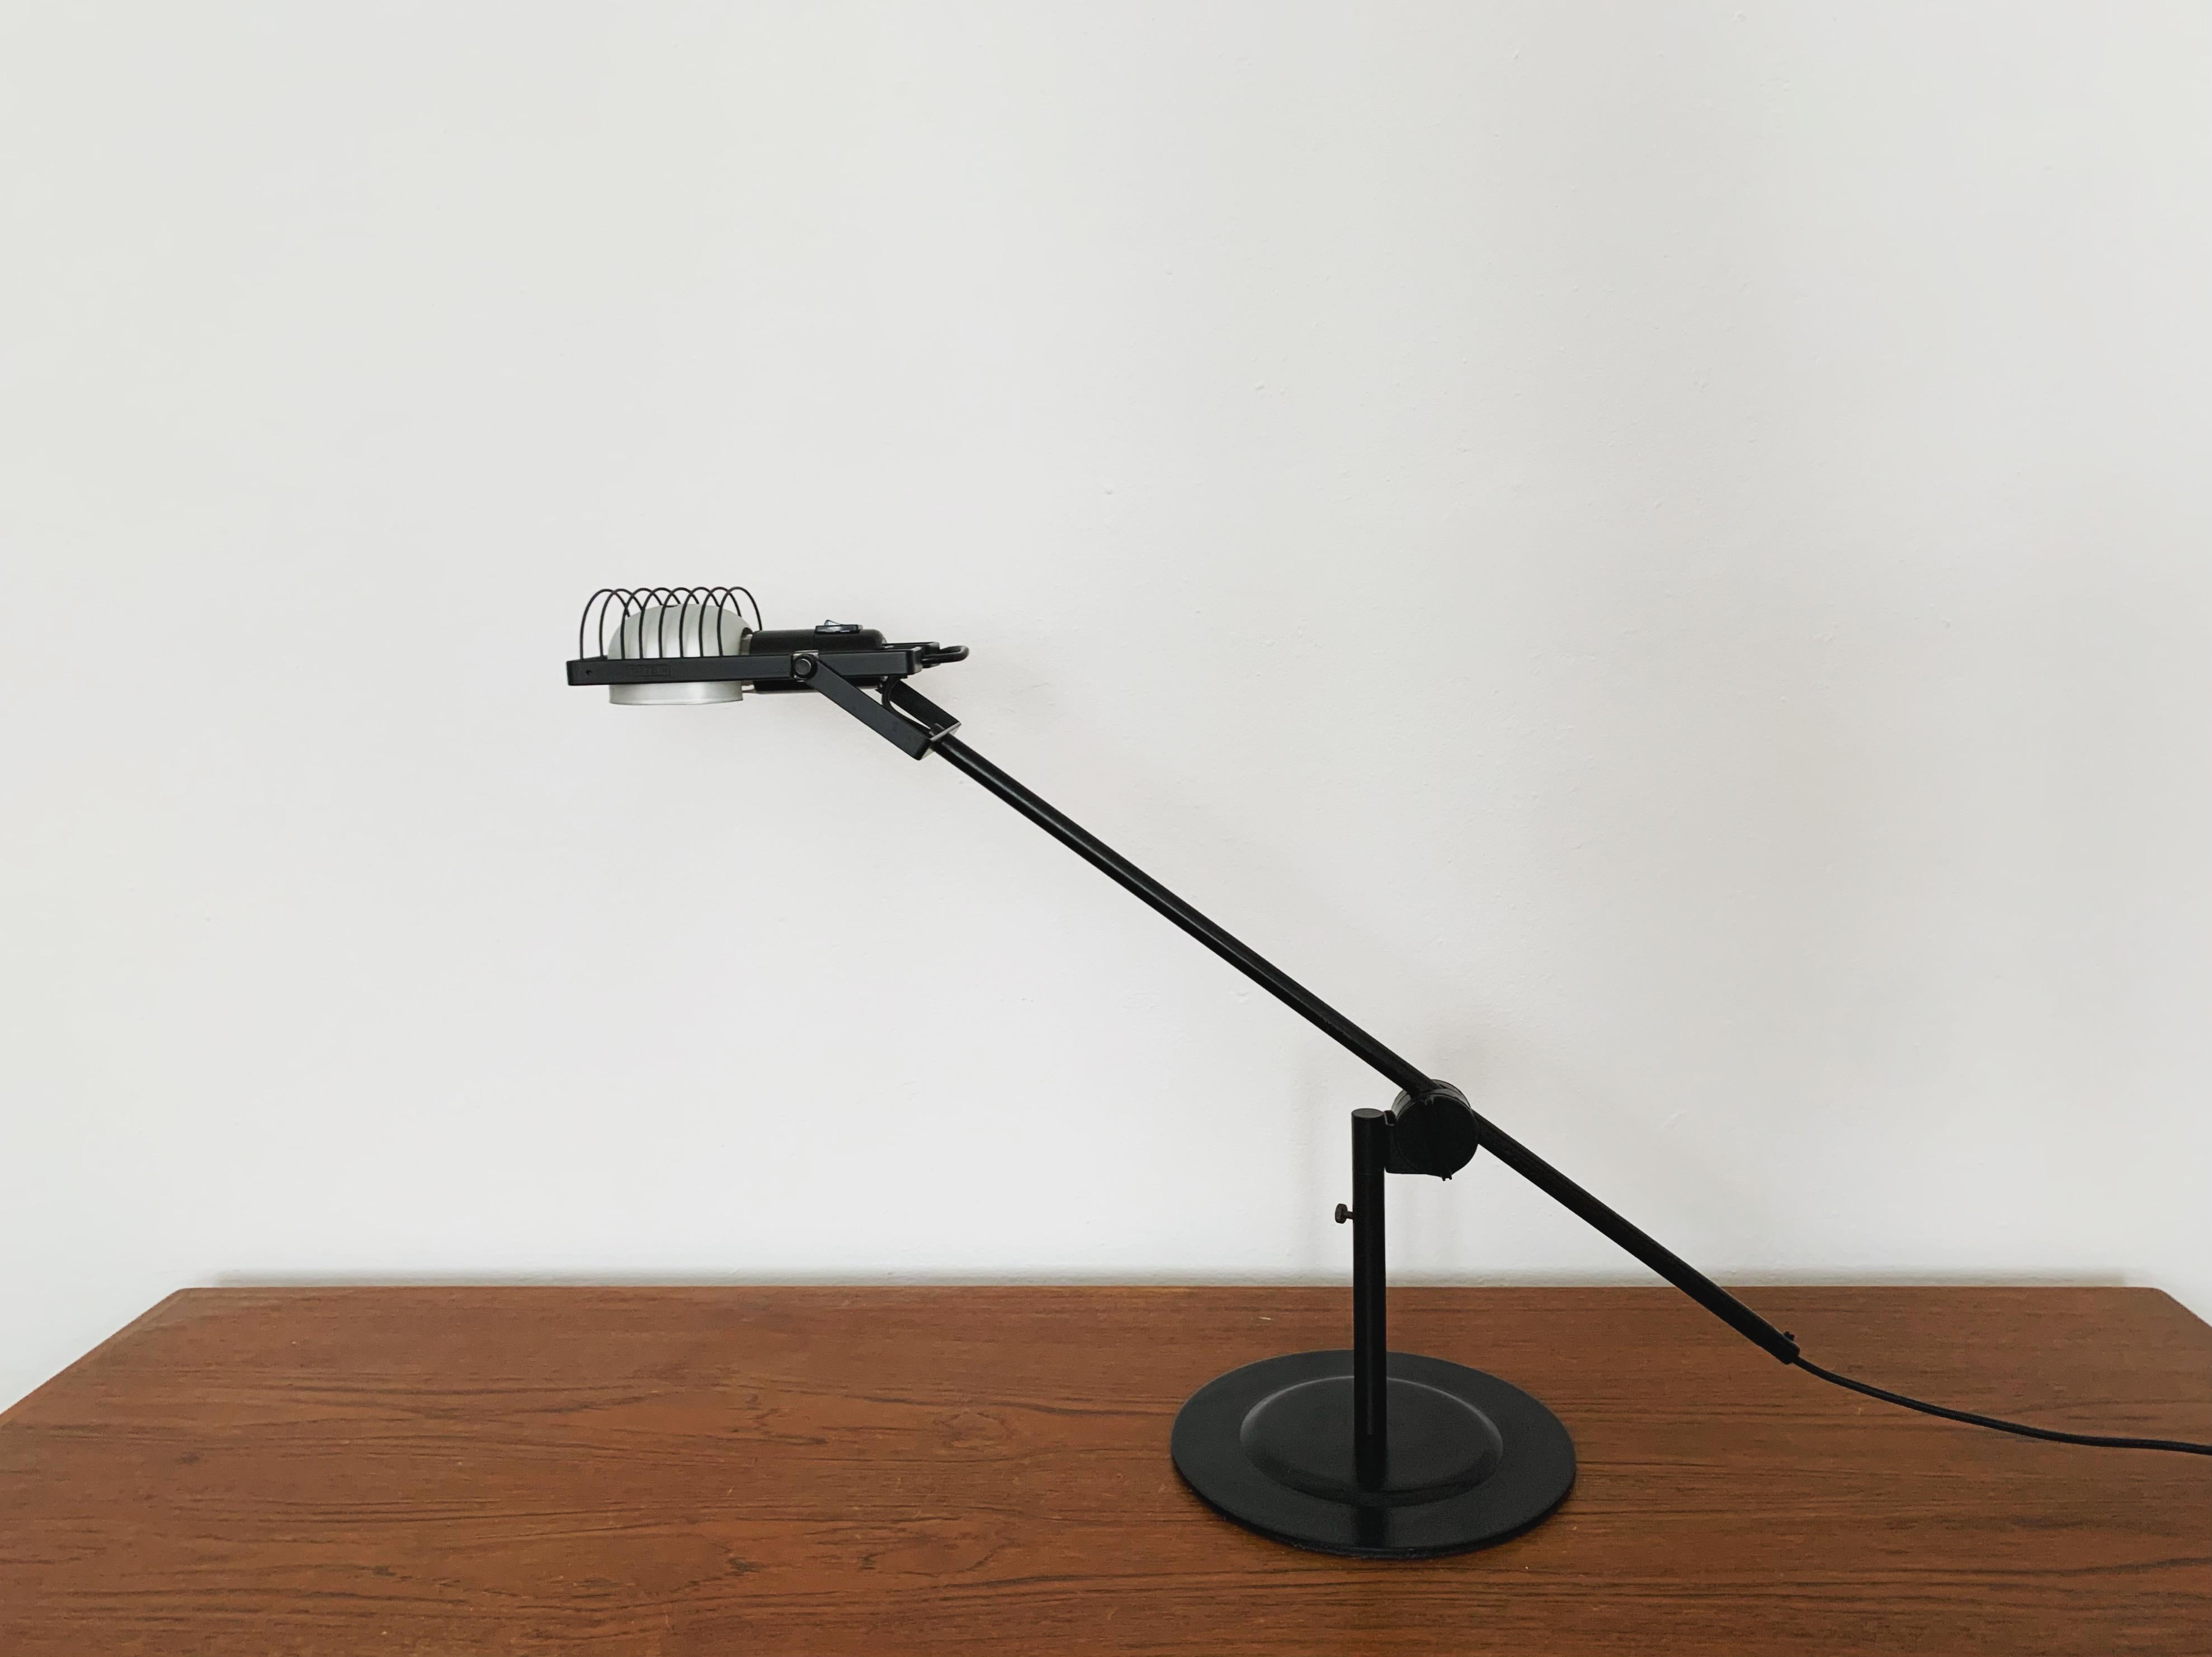 Fabulous Italian desk lamp by Ernesto Gismondi from the 1970s.
Industrial design and high quality workmanship.
An absolute highlight for every design lover.

Design: Ernesto Gismondi
Manufacturer: Artemide

Condition:

Very good vintage